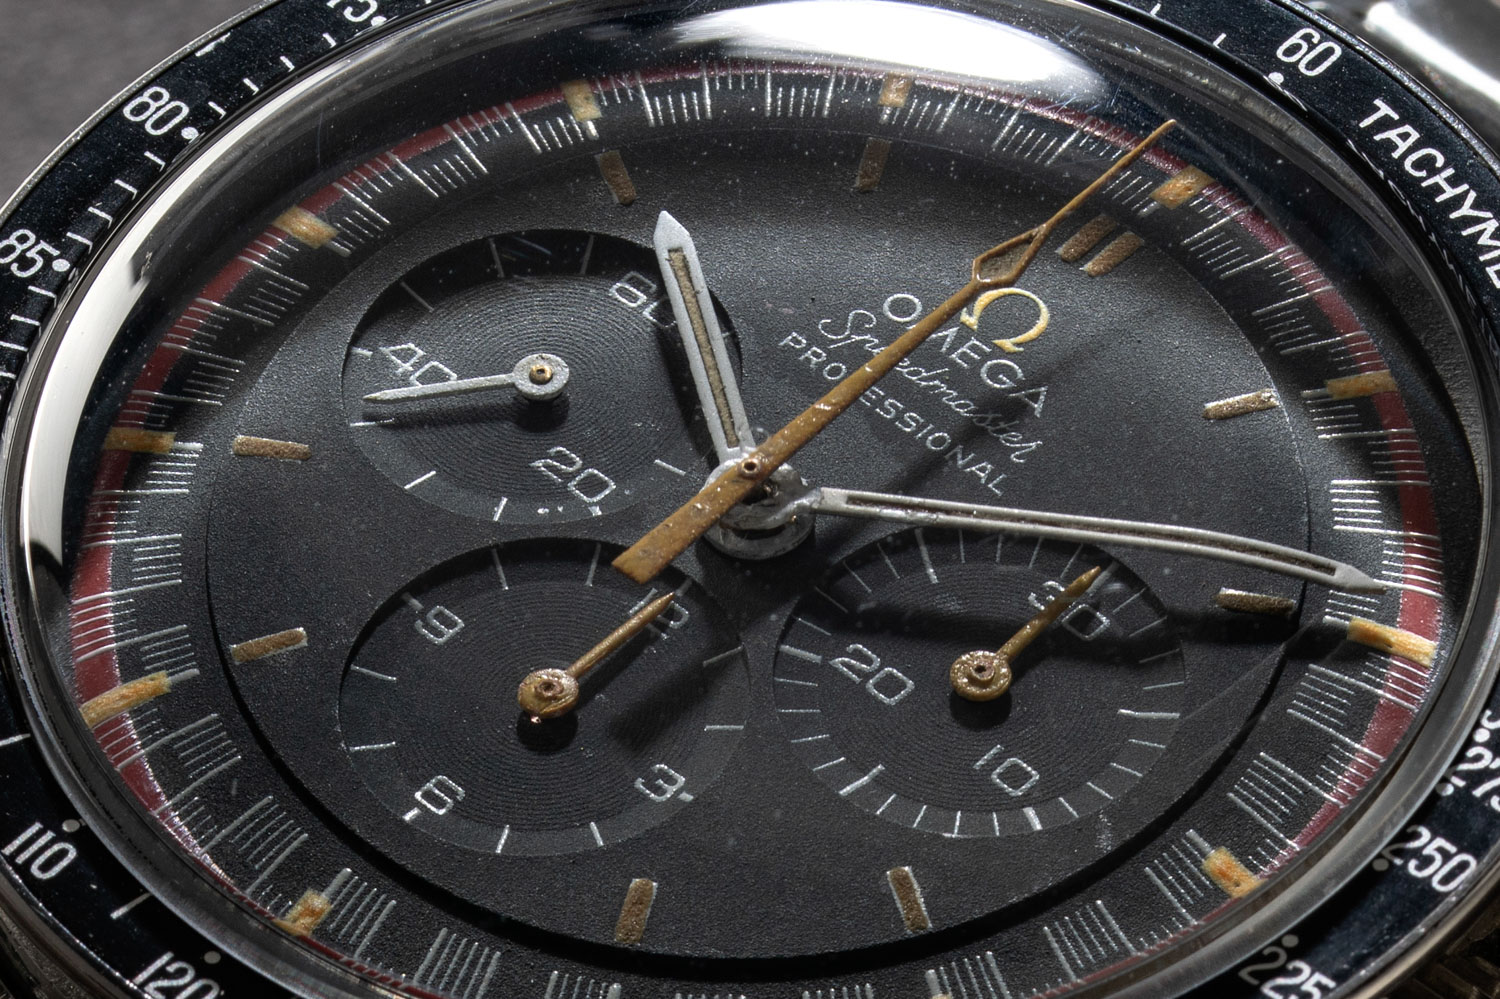 The Speedmaster Reference 145.022-69 with the Racing Dial and orange arrow-tipped central chrono hand (©Revolution)